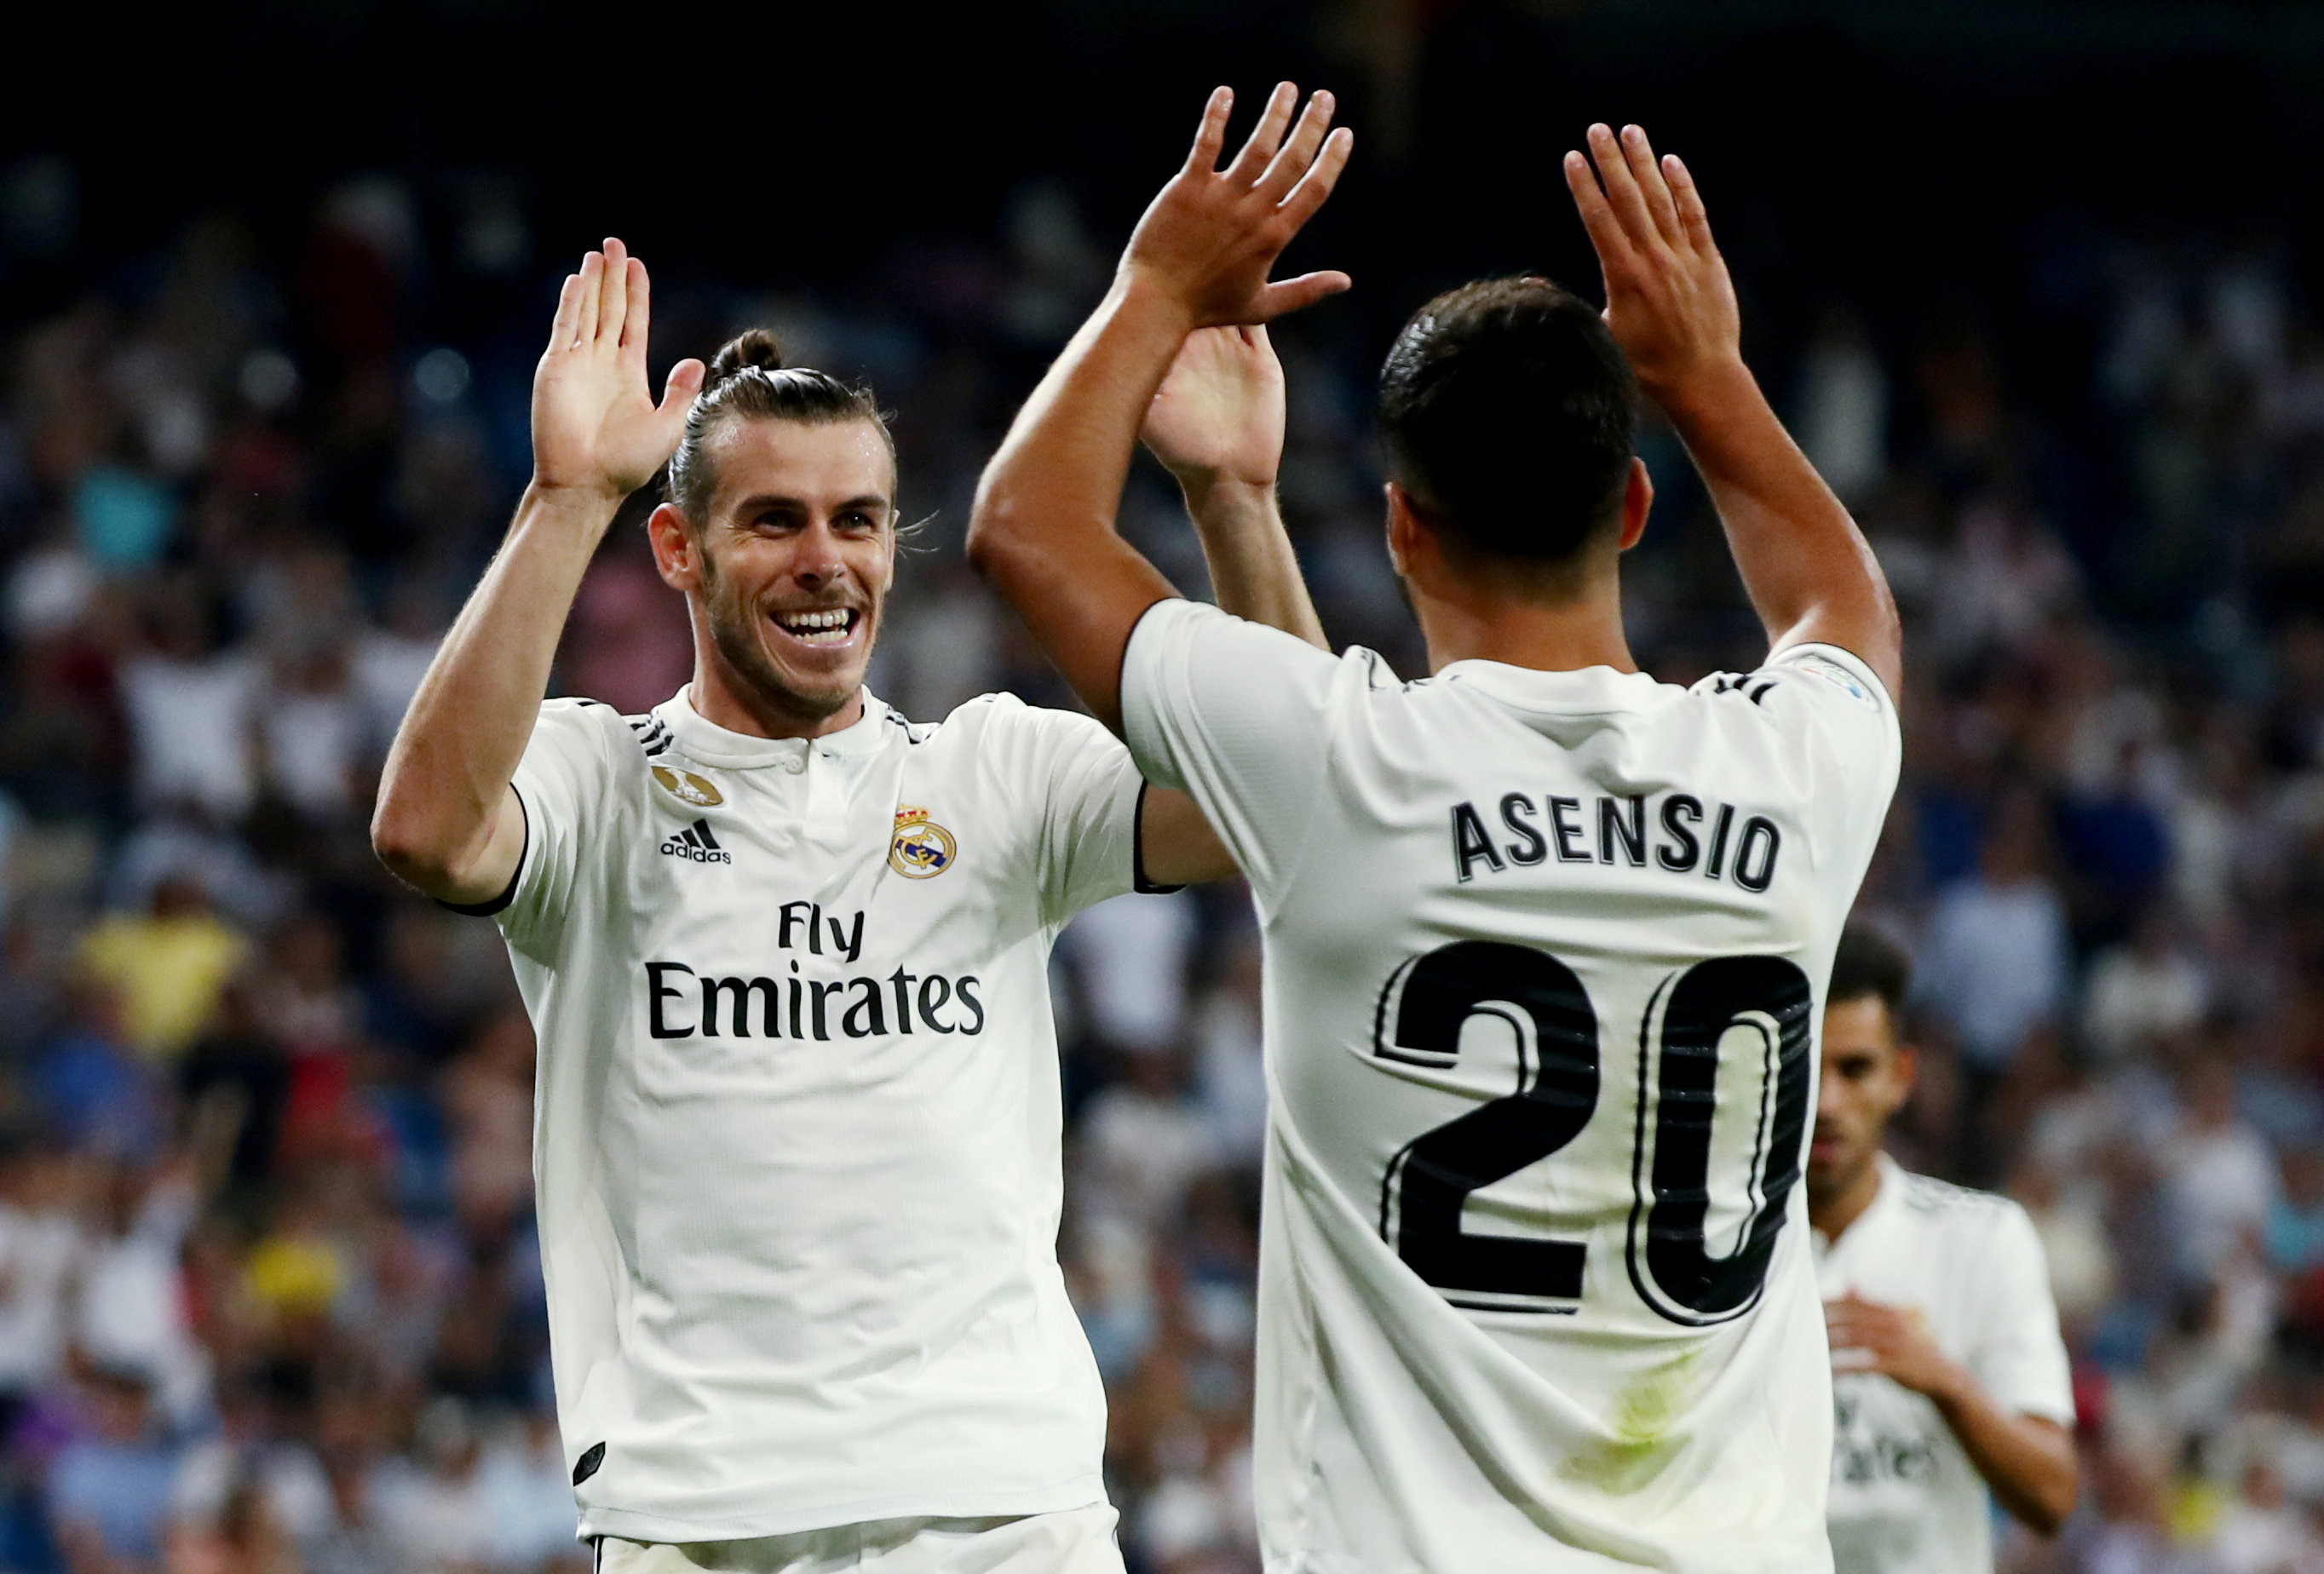 Football: Bale shines as Real stroll to victory over Getafe